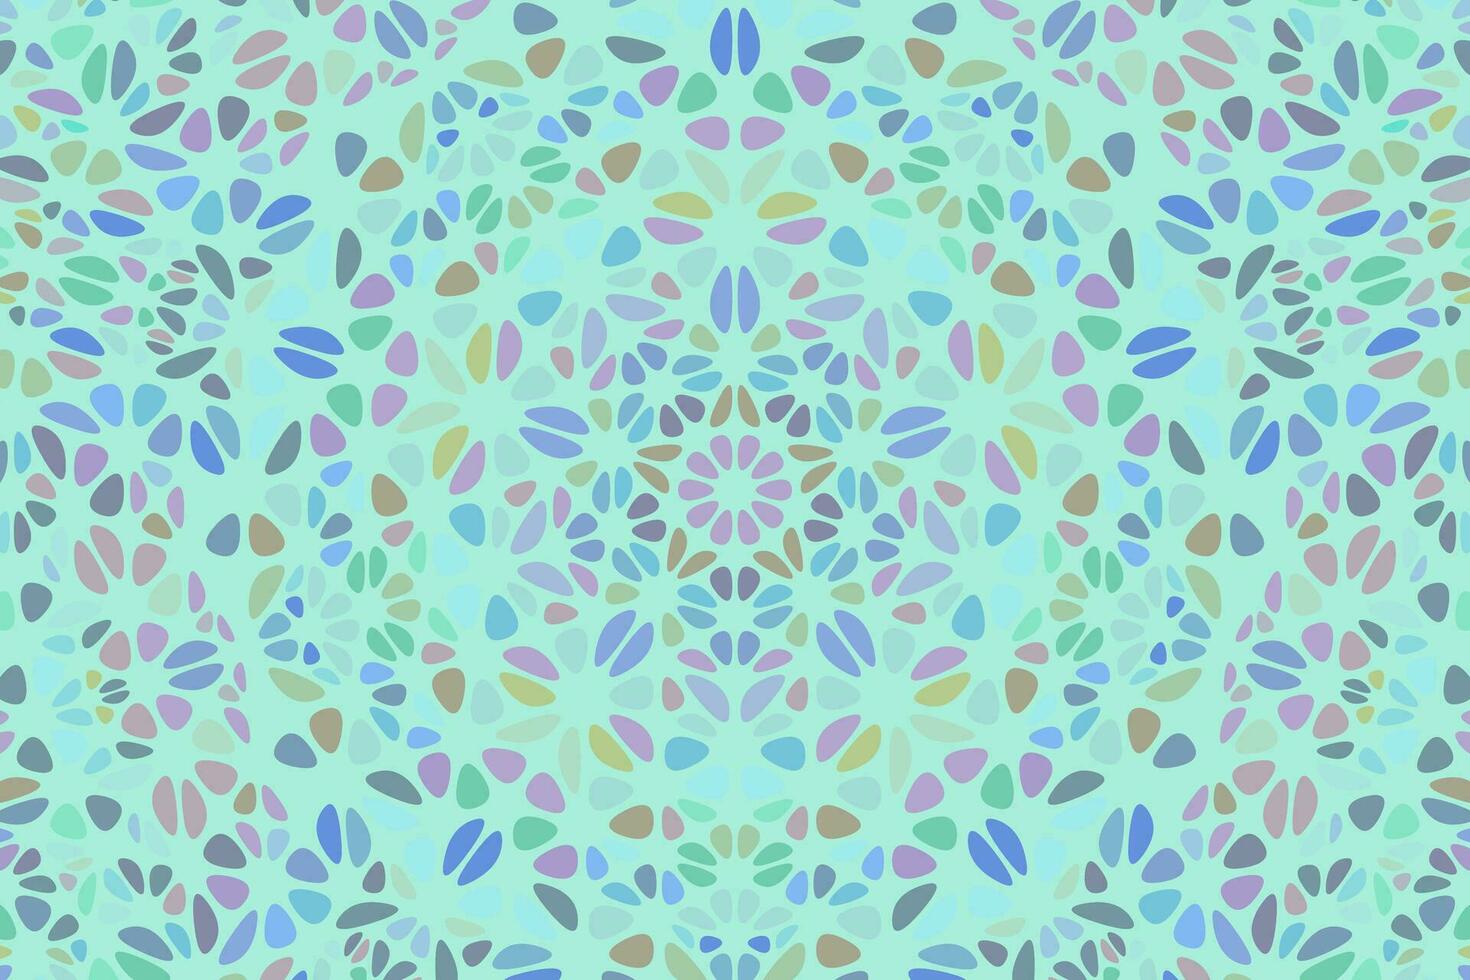 Dynamic abstract geometrical circular floral pattern background vector